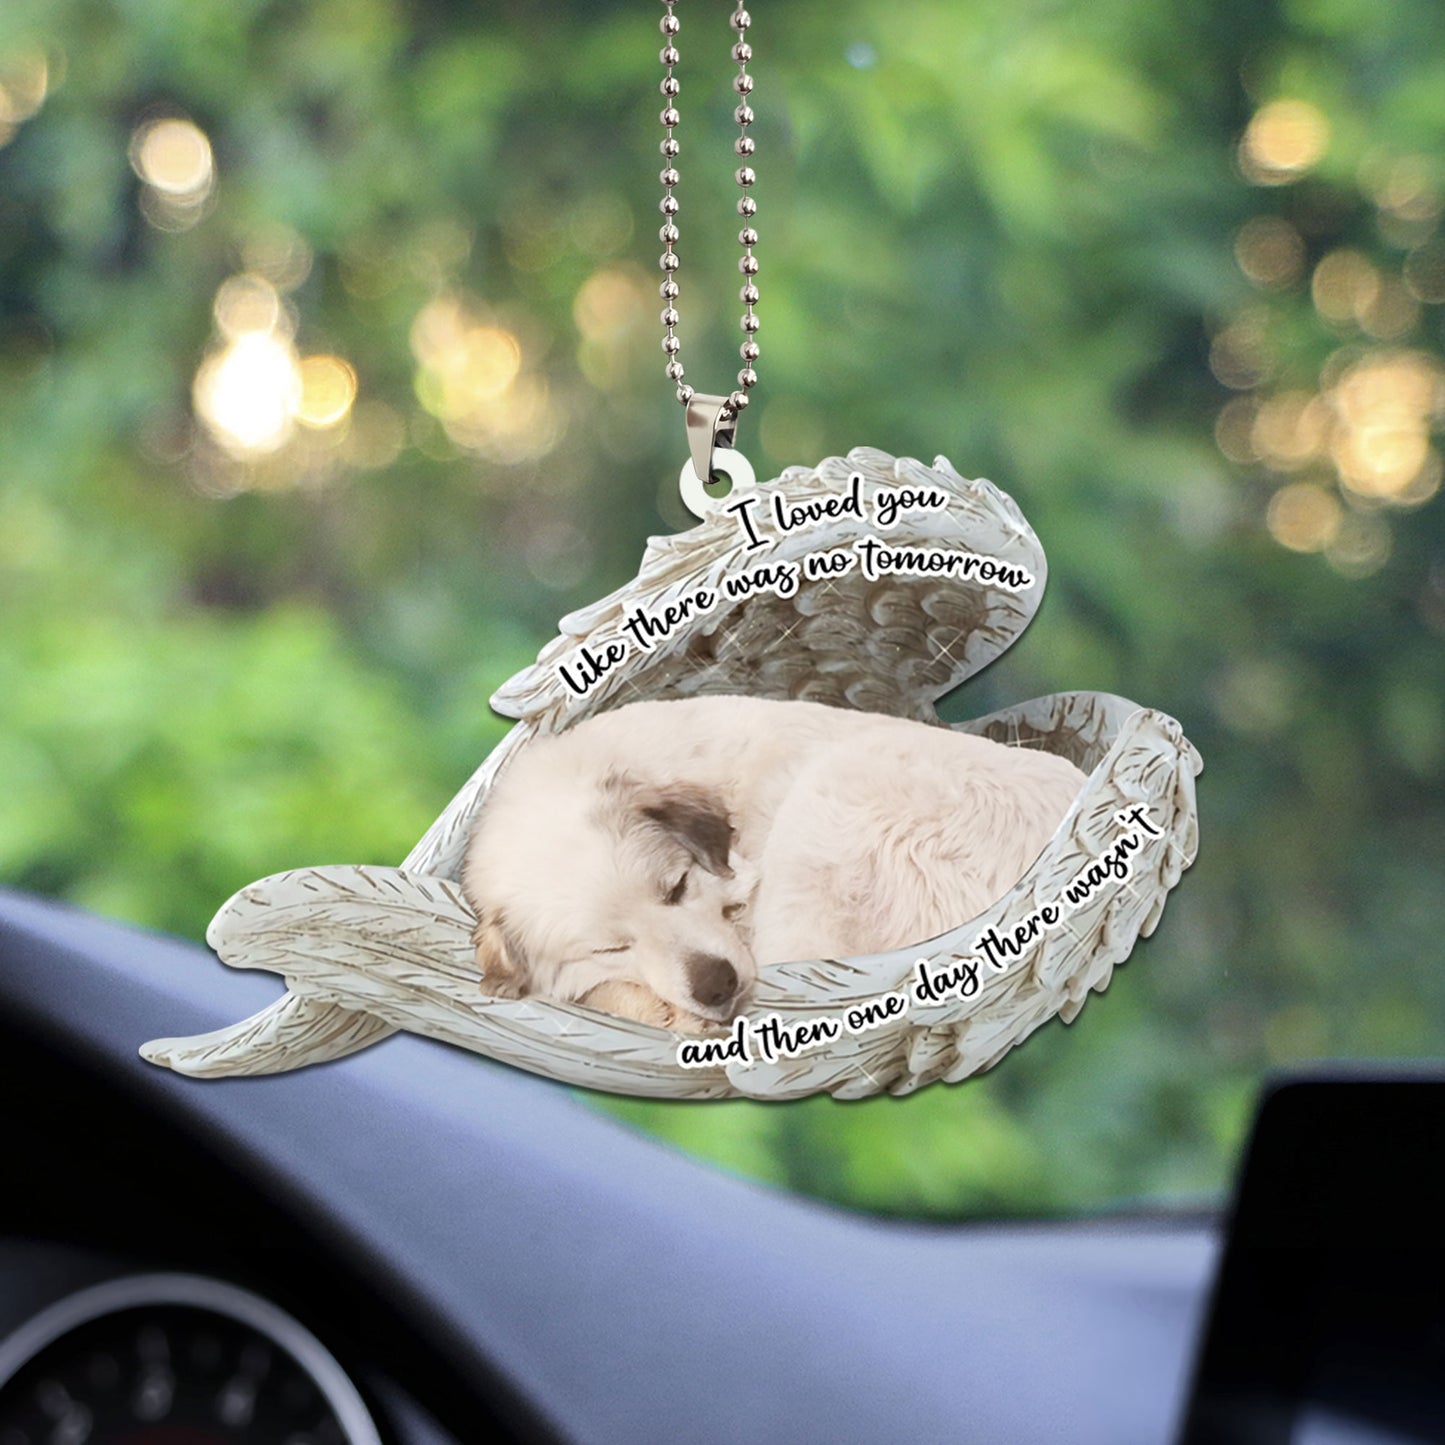 Great Pyrenees Sleeping Angel Dog Personalizedwitch Flat Car Memorial Ornament